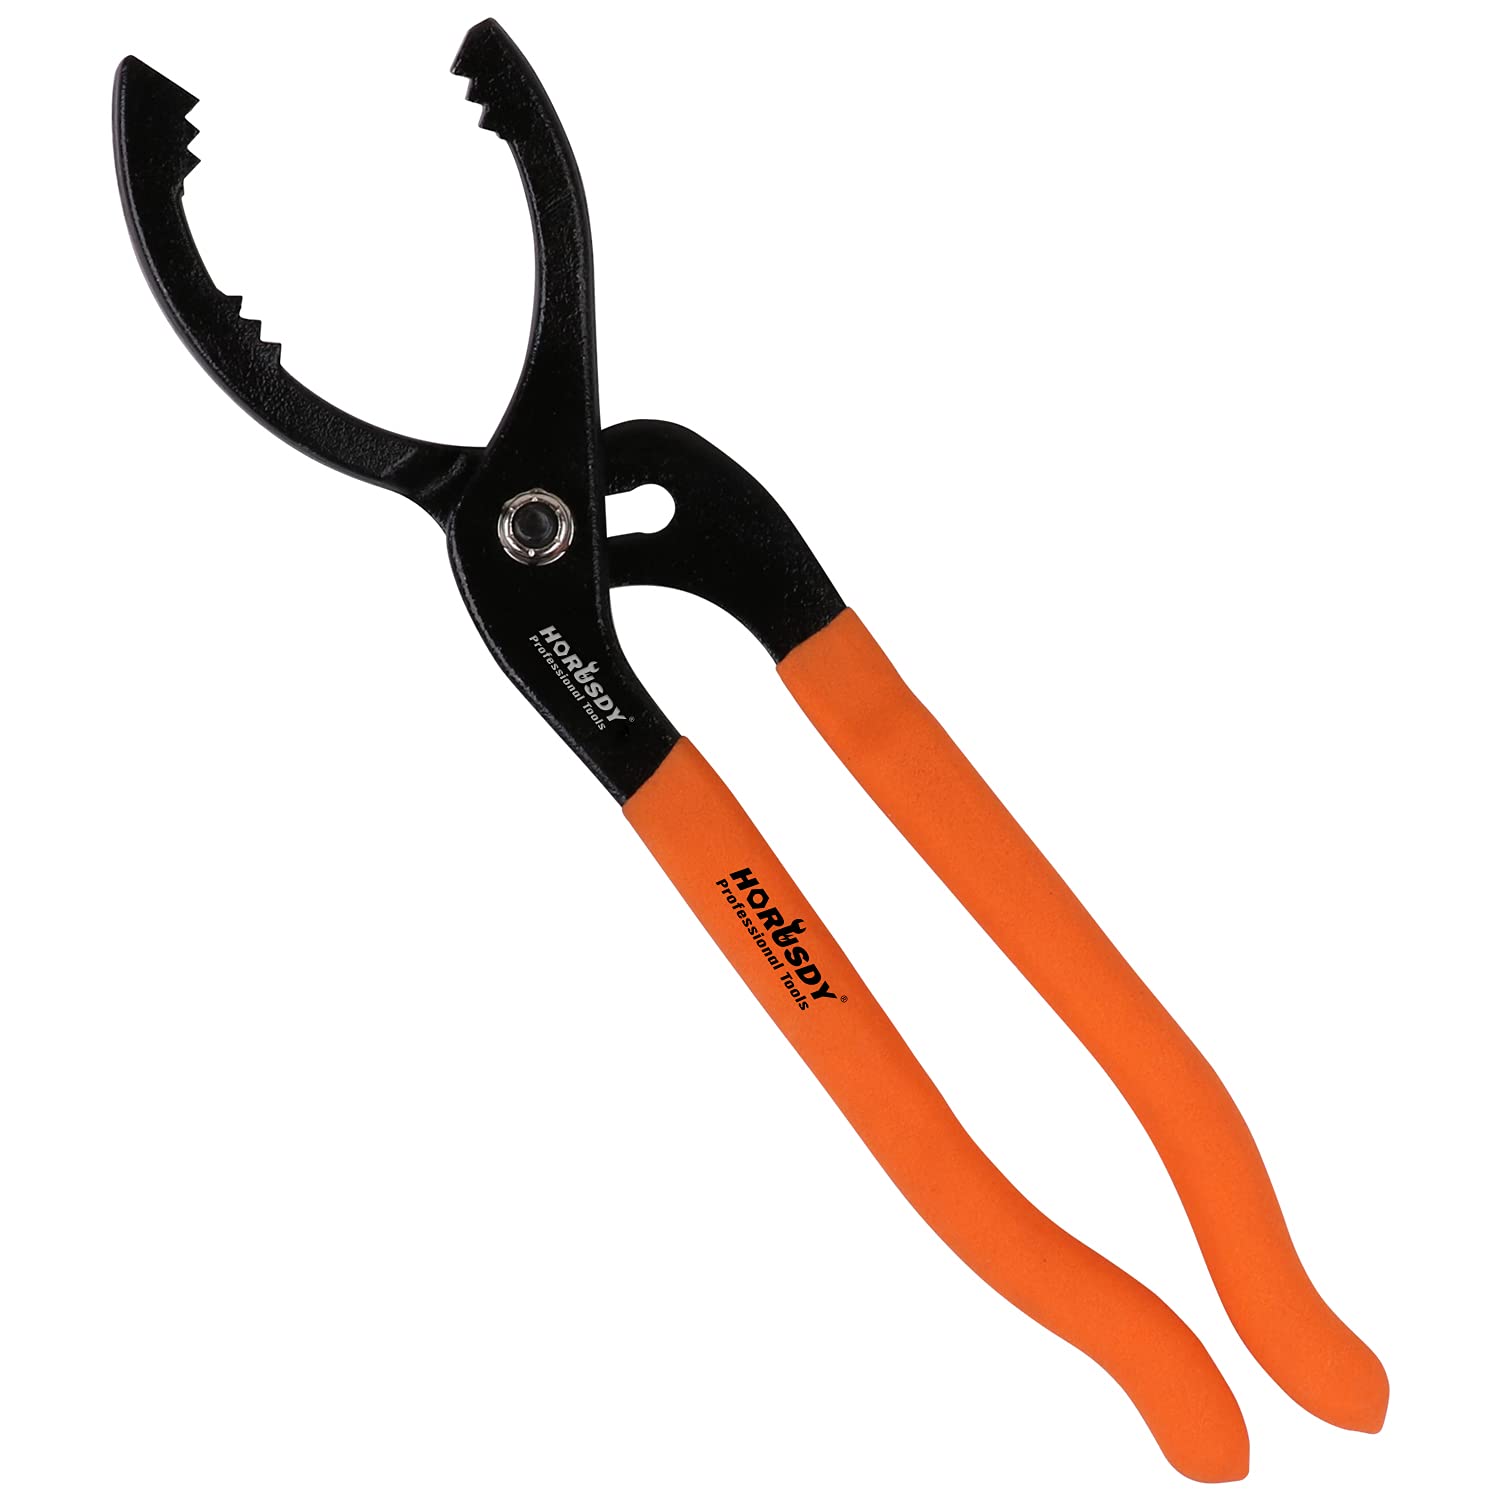 HORUSDY 12" Adjustable Oil Filter Pliers, Adjustable Oil Filter Wrench Removal Tool